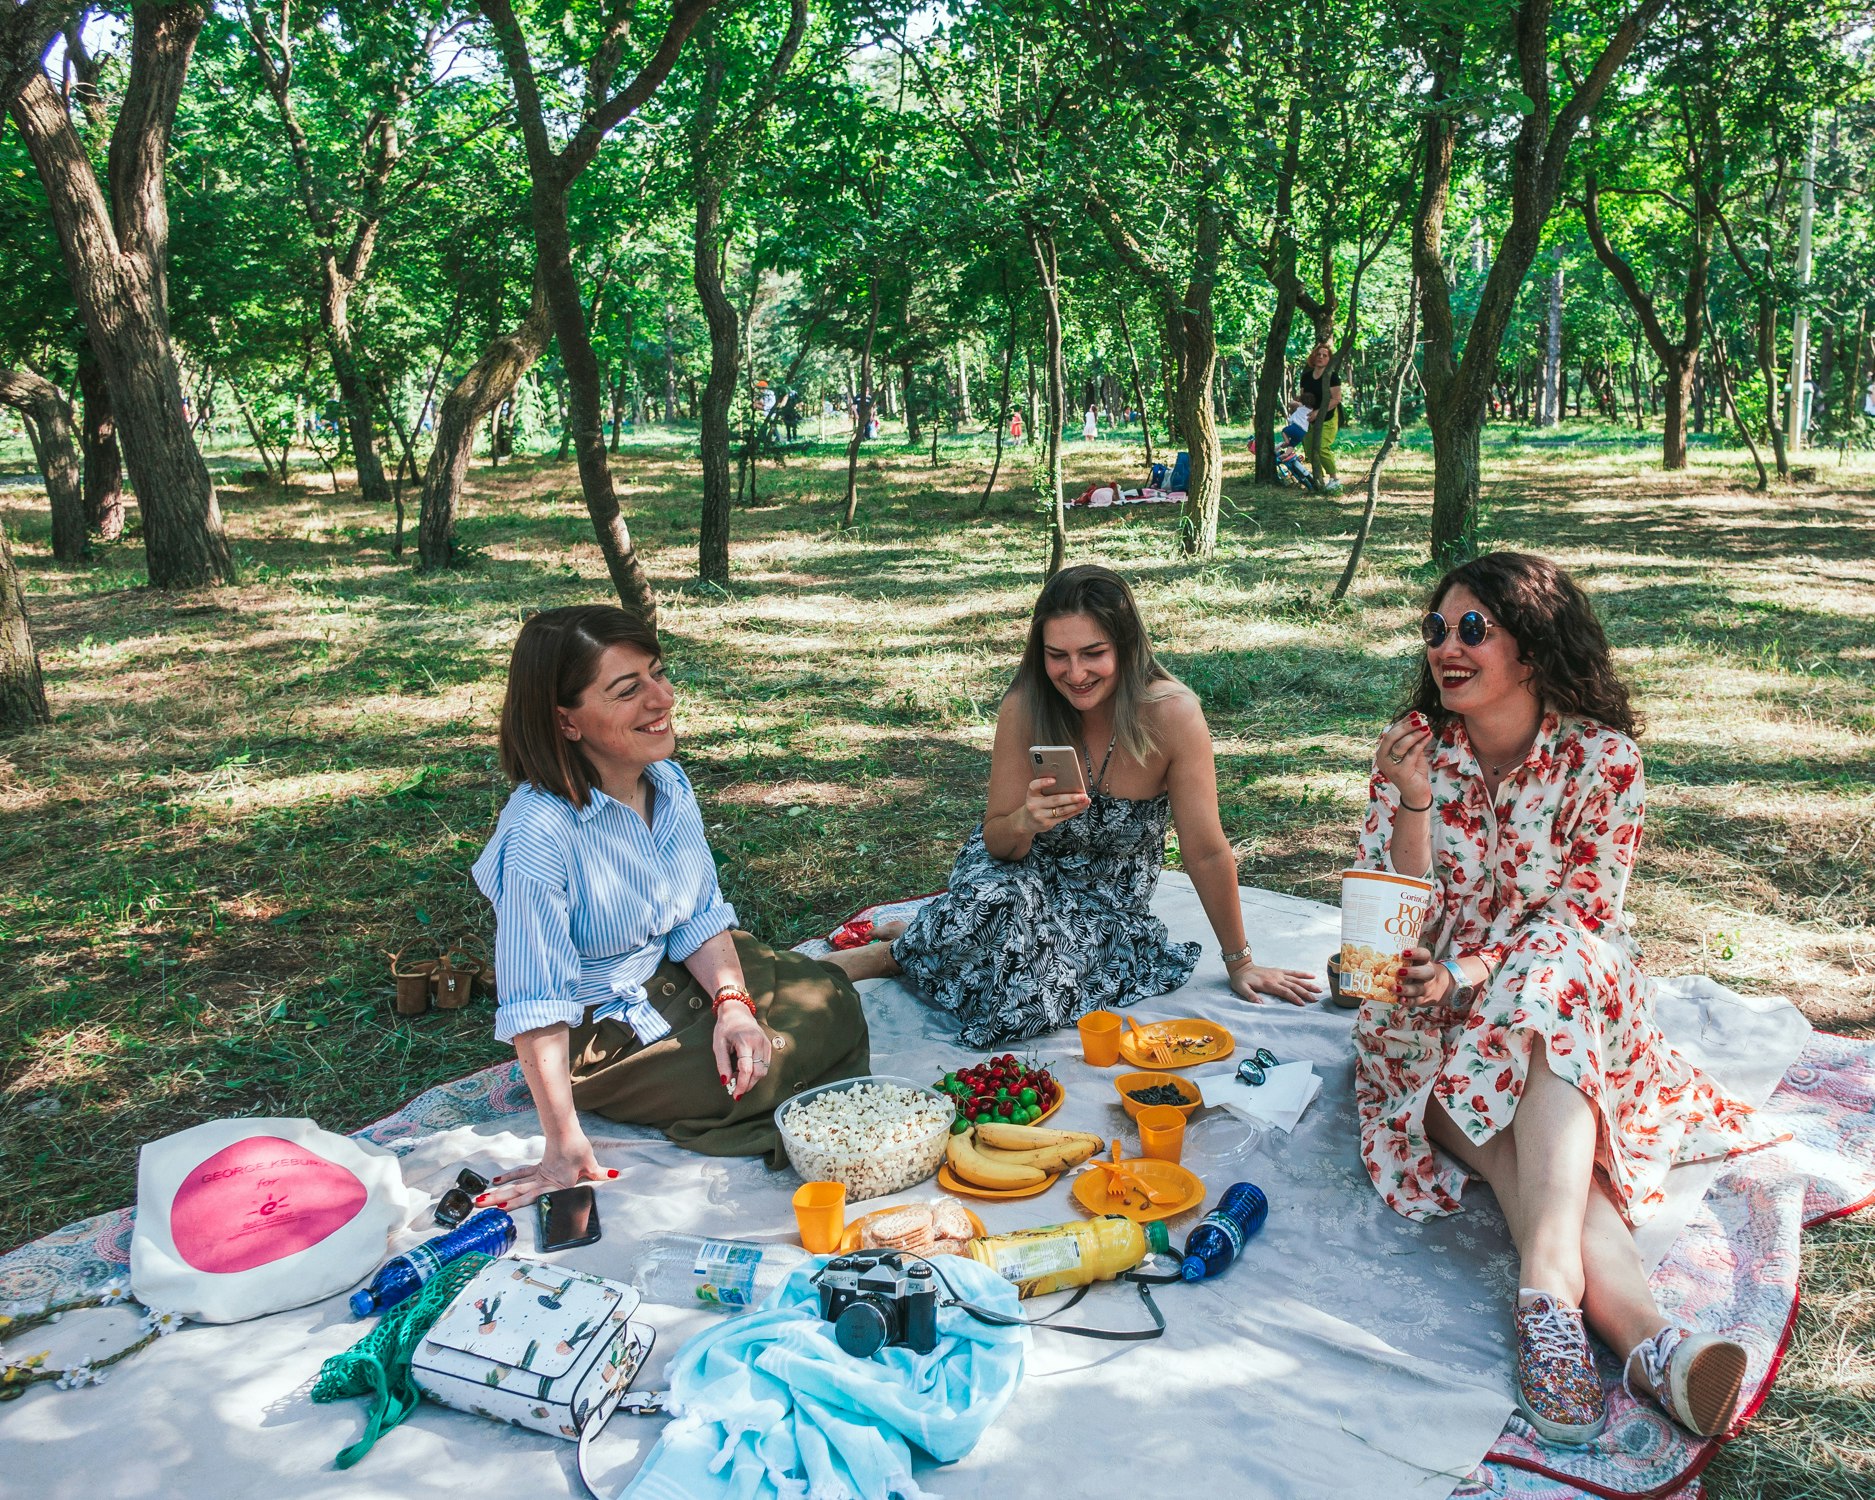 Three young women are sitting on a blanket, enjoying a picnic in a park beside Lisi Lake; they are surrounded by trees, and are smiling and laughing.